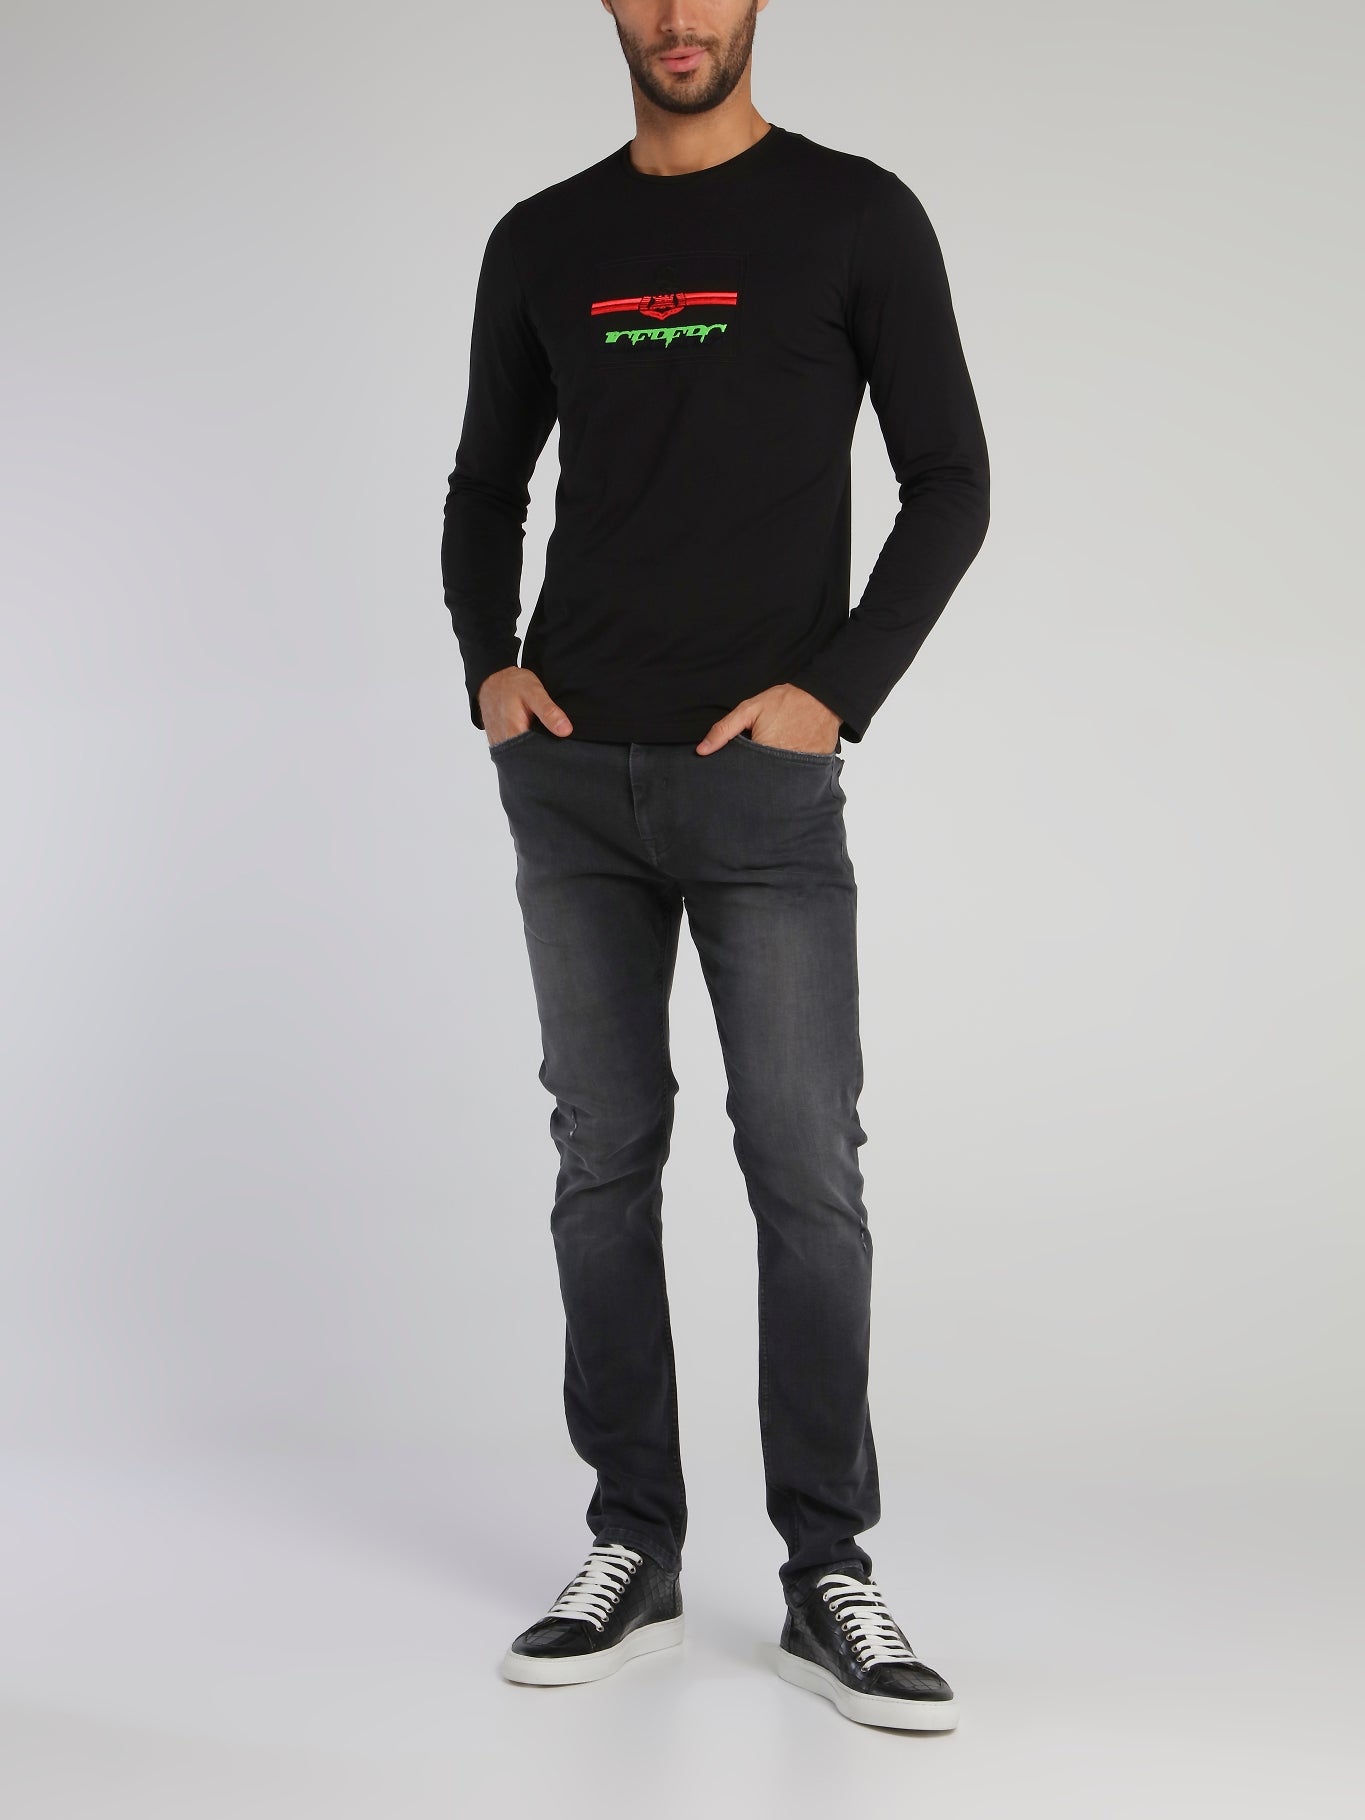 Black Long Sleeve With Embroidered Logo T-Shirt